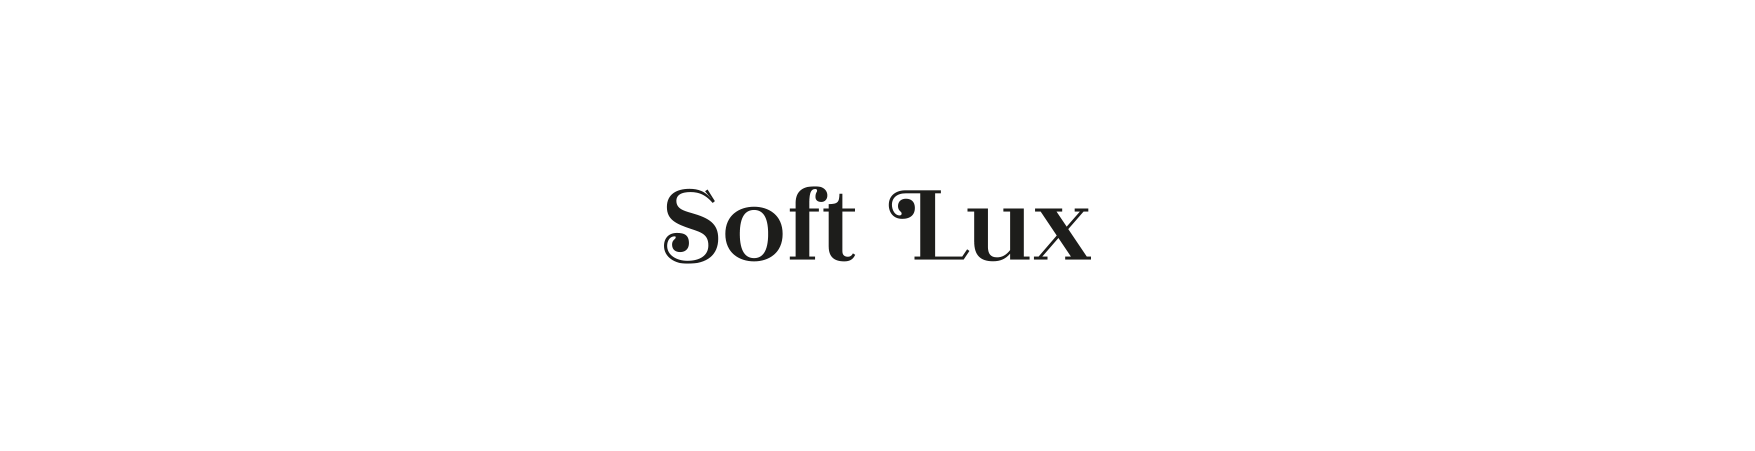 Soft Lux